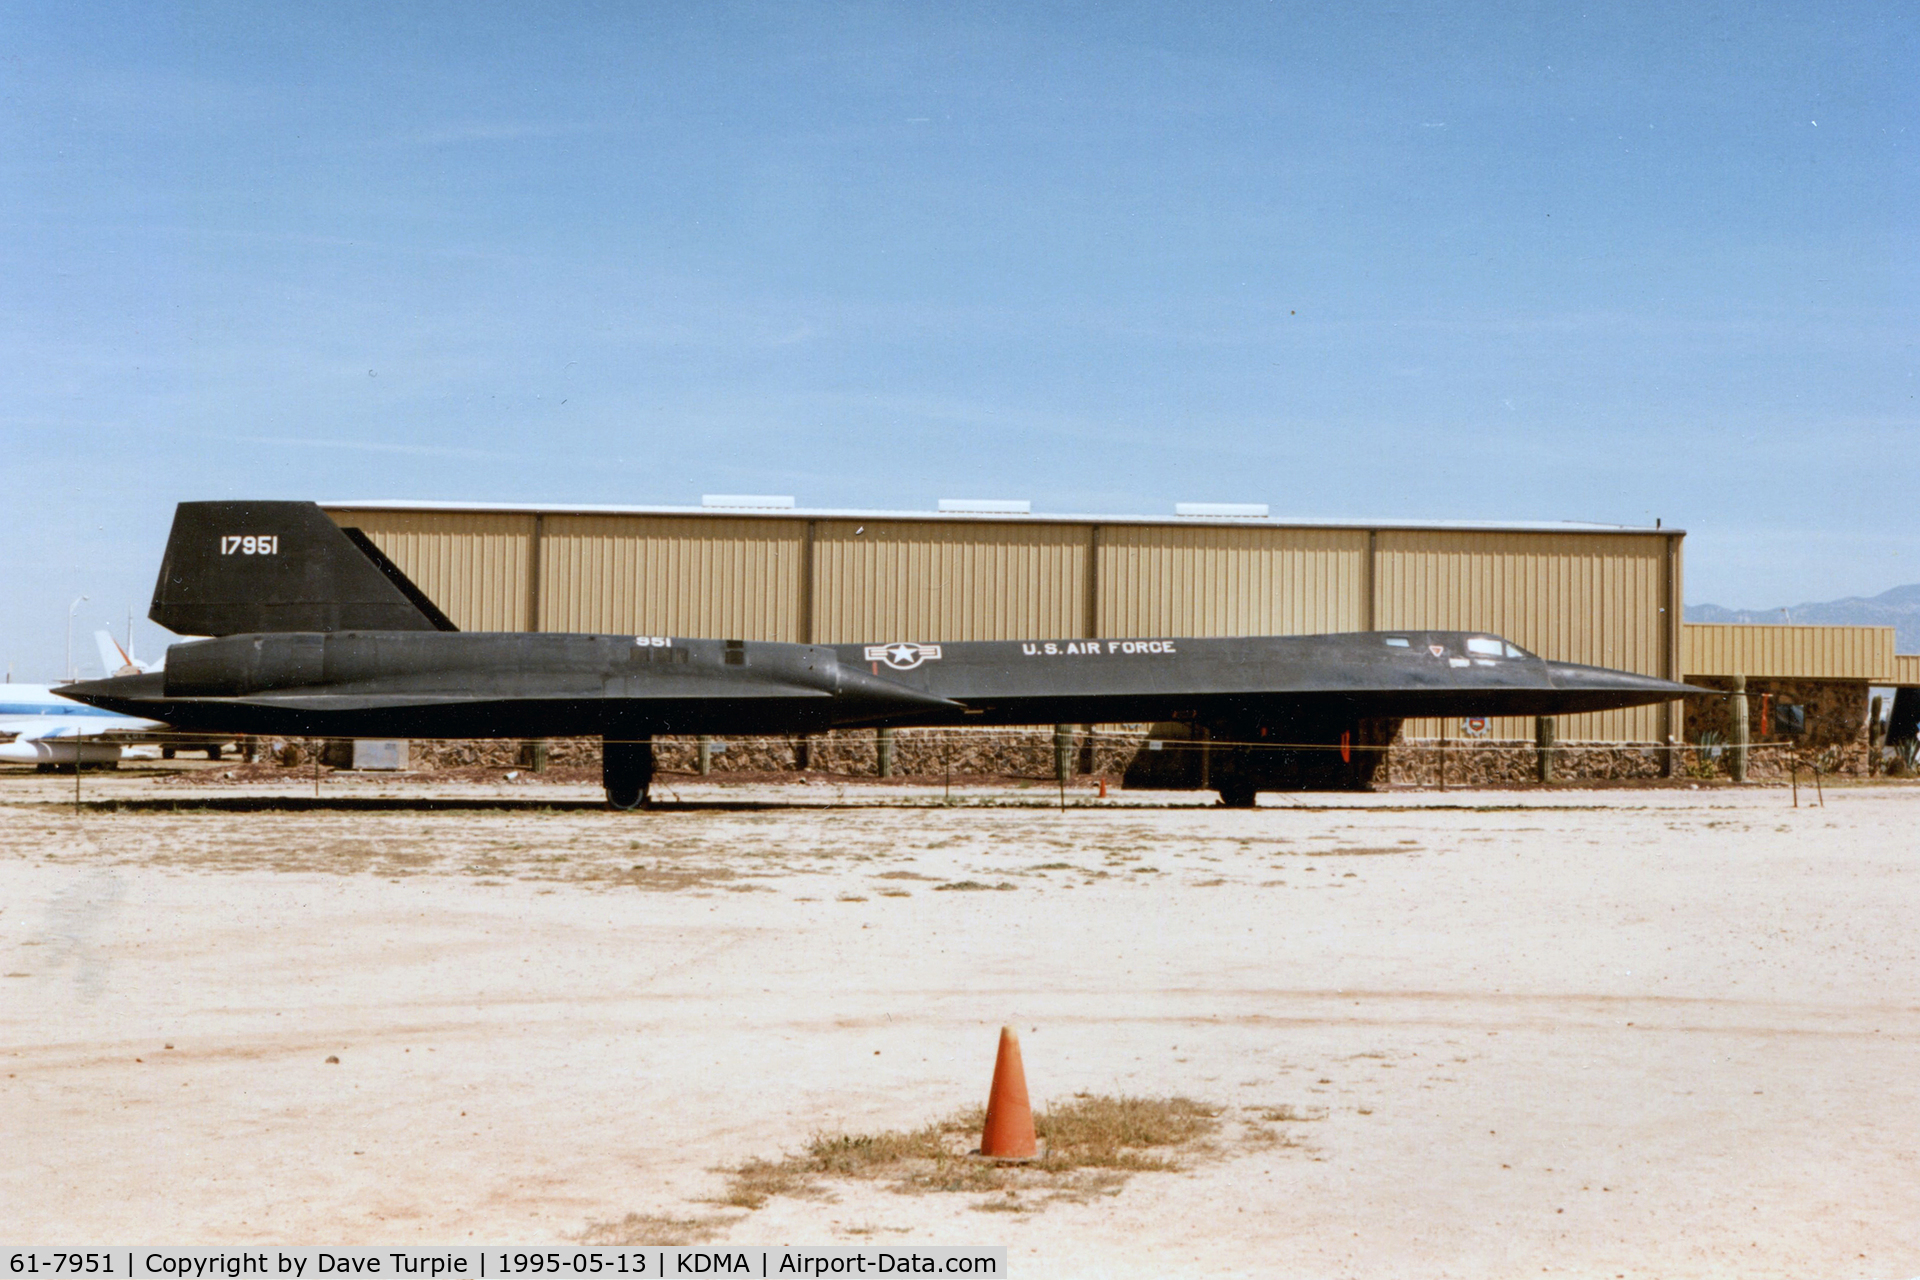 61-7951, 1961 Lockheed SR-71A Blackbird C/N 2002, On display prior to moving the plane inside. The plane was the second SR-71 built and the oldest surviving.  Per Pima Air Museum, it rolled off the assembly line 20 Oct 1964 and first flew on 5 Mar 1965.  It has been on dislay at the museum since 1991.